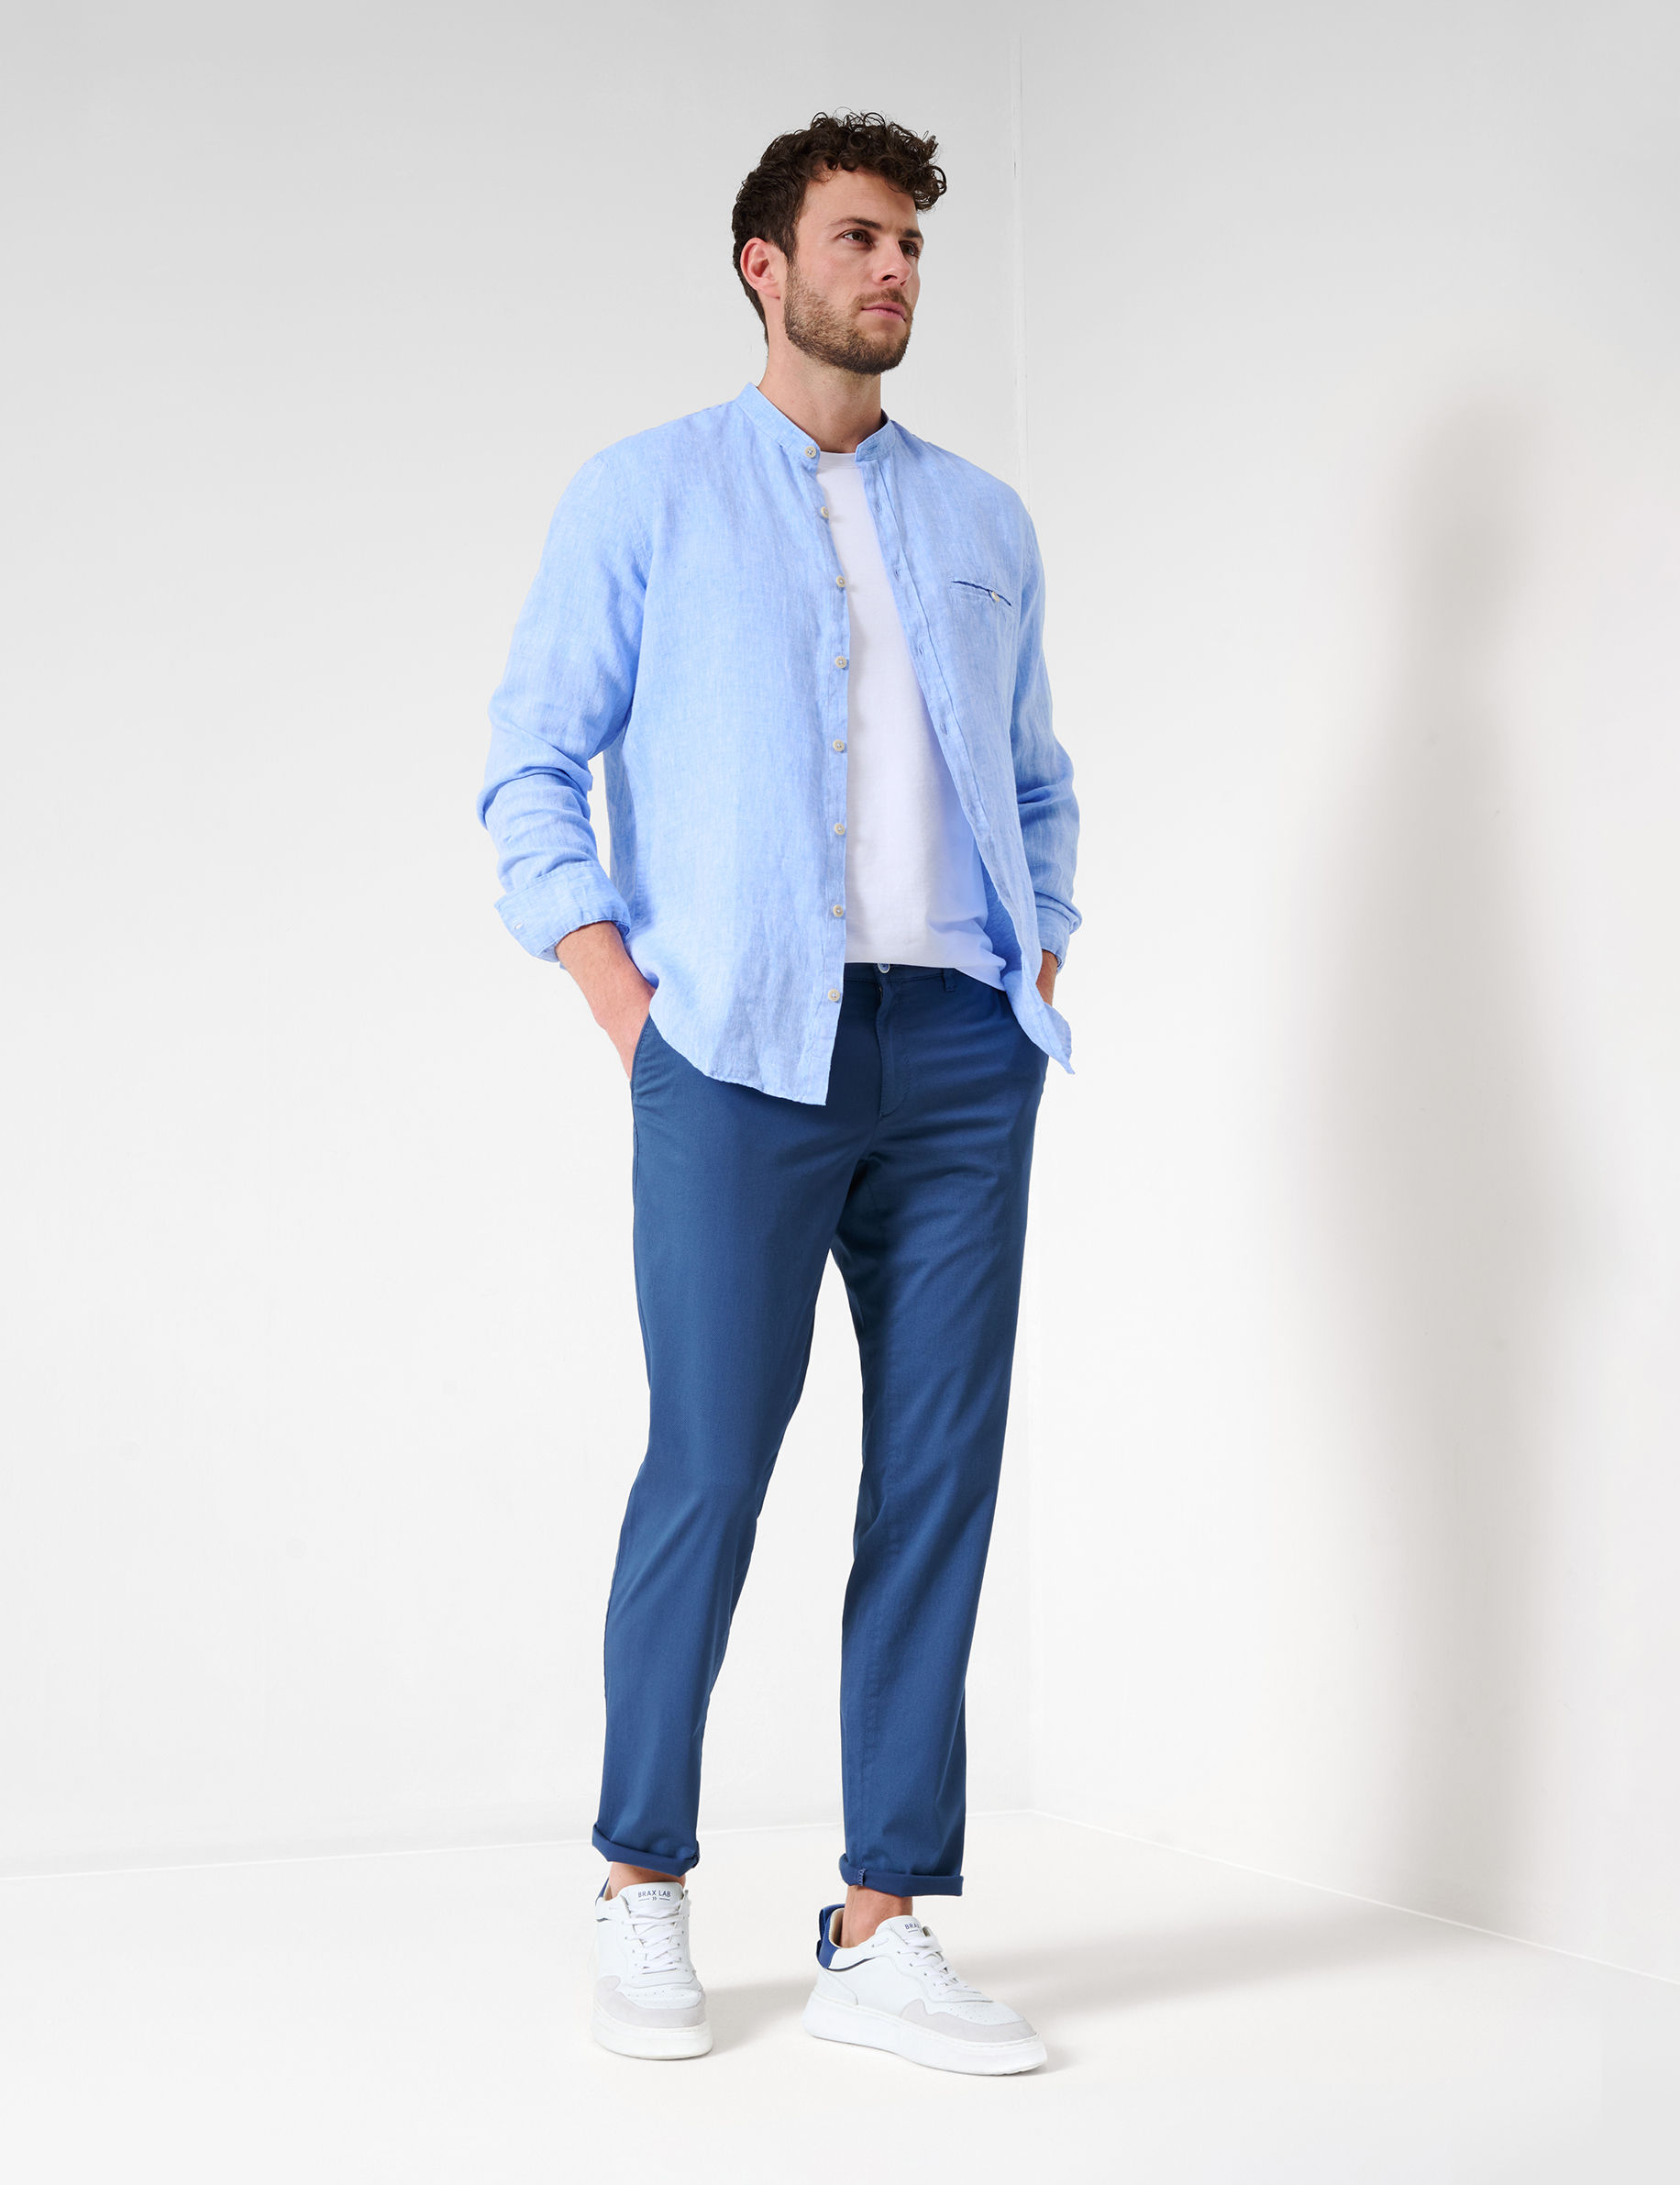 Men Style LARS smooth blue  Model Outfit